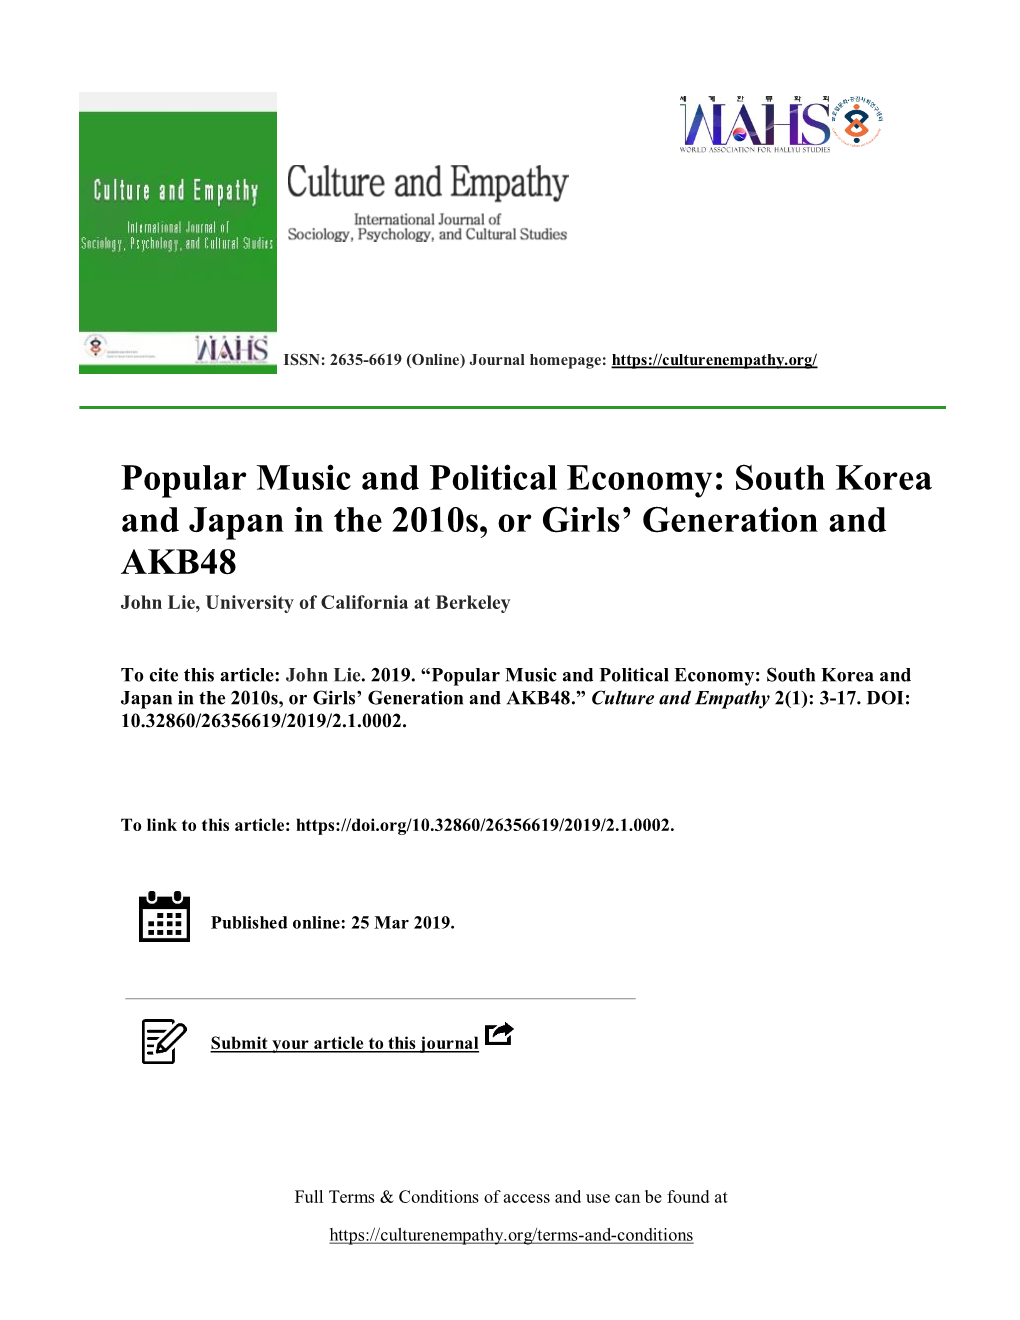 Popular Music and Political Economy: South Korea and Japan in the 2010S, Or Girls’ Generation and AKB48 John Lie, University of California at Berkeley